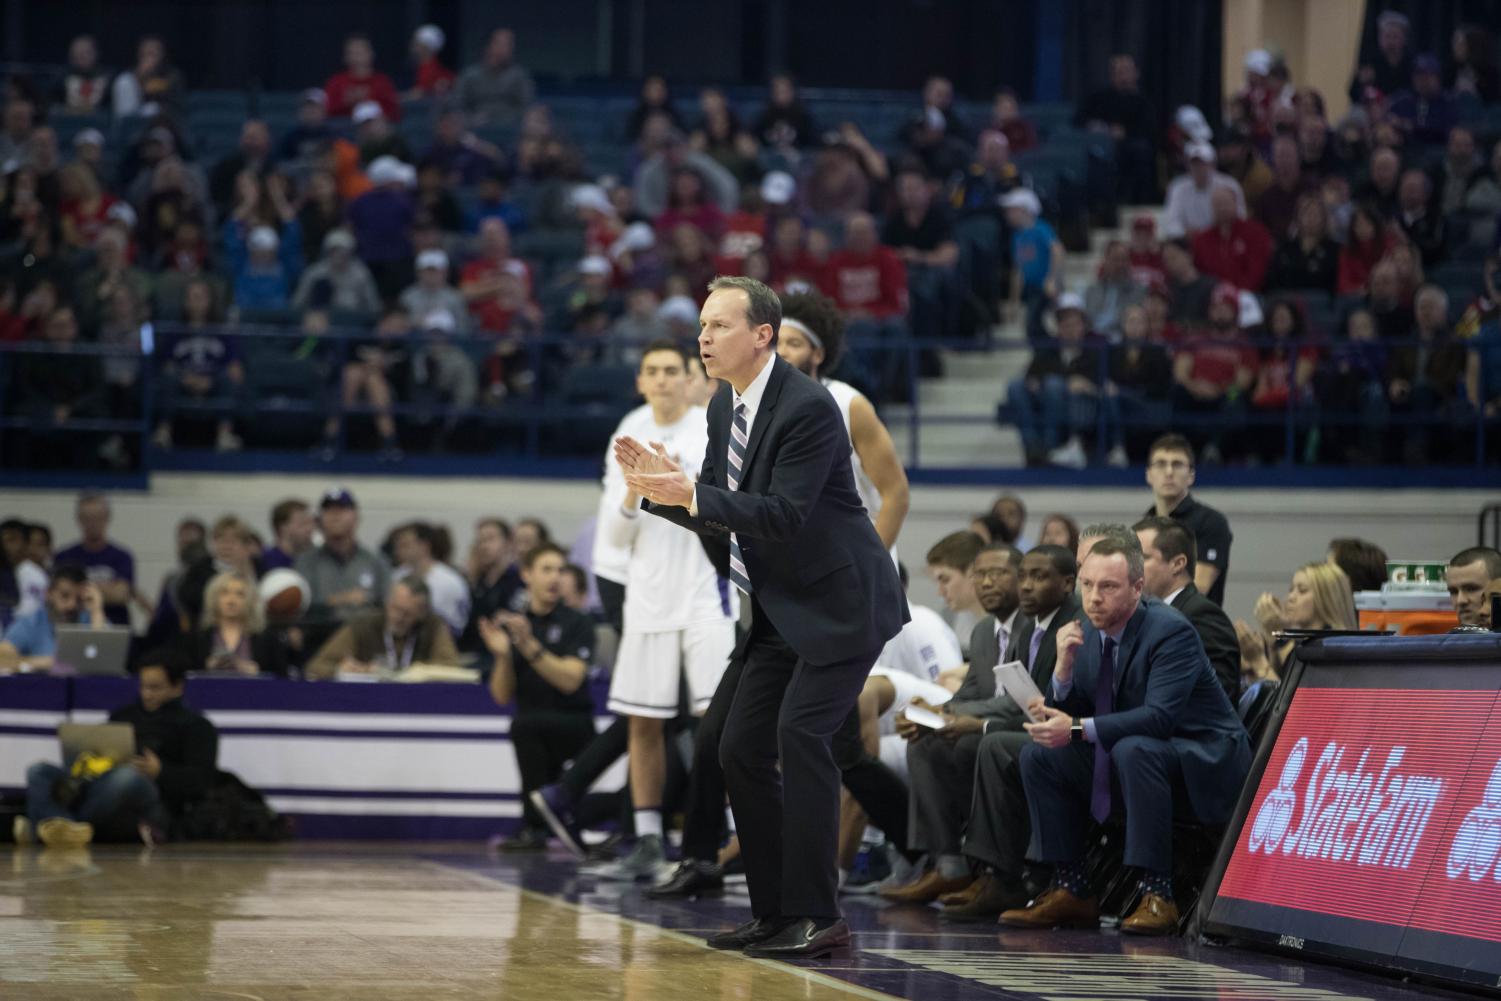 Chris+Collins+coaches+from+the+bench.+On+Monday%2C+he+added+a+new+coach+to+his+staff+to+help+lead+Northwestern+next+season.